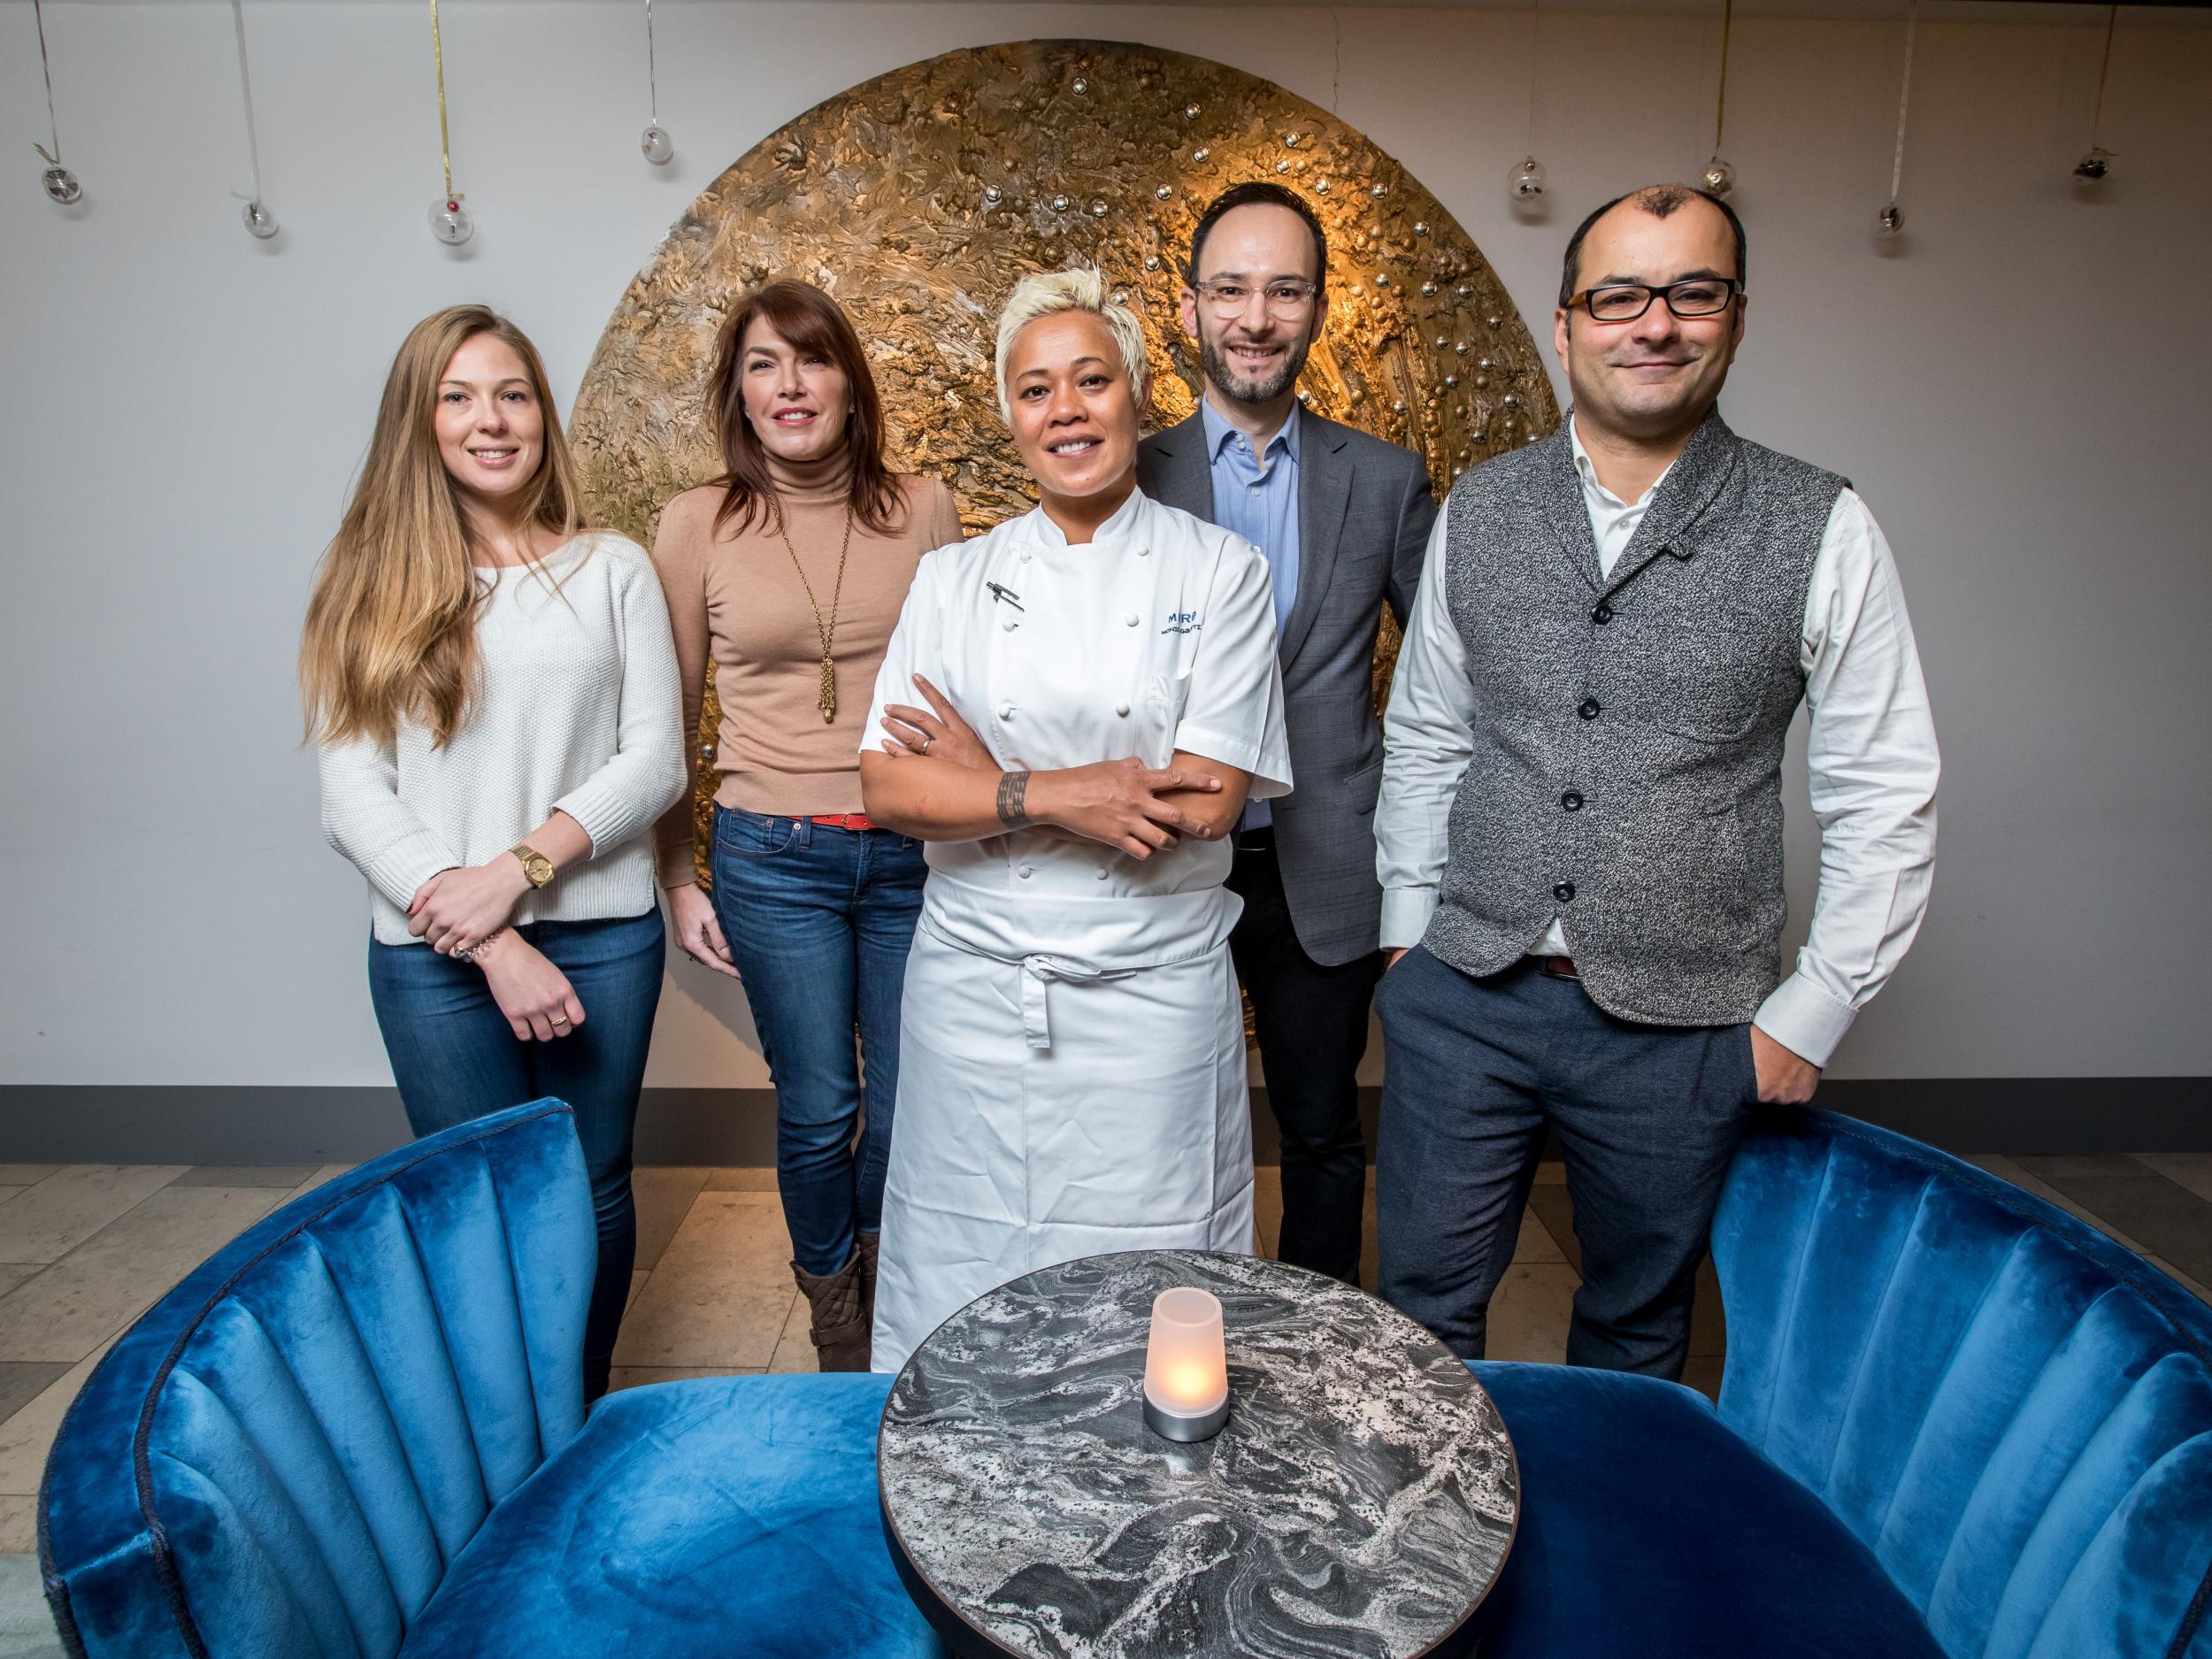 StreetSmart, our Christmas appeal partner, has a host of celebrity supporters including chef Monica Galetti, who runs Mere restaurant